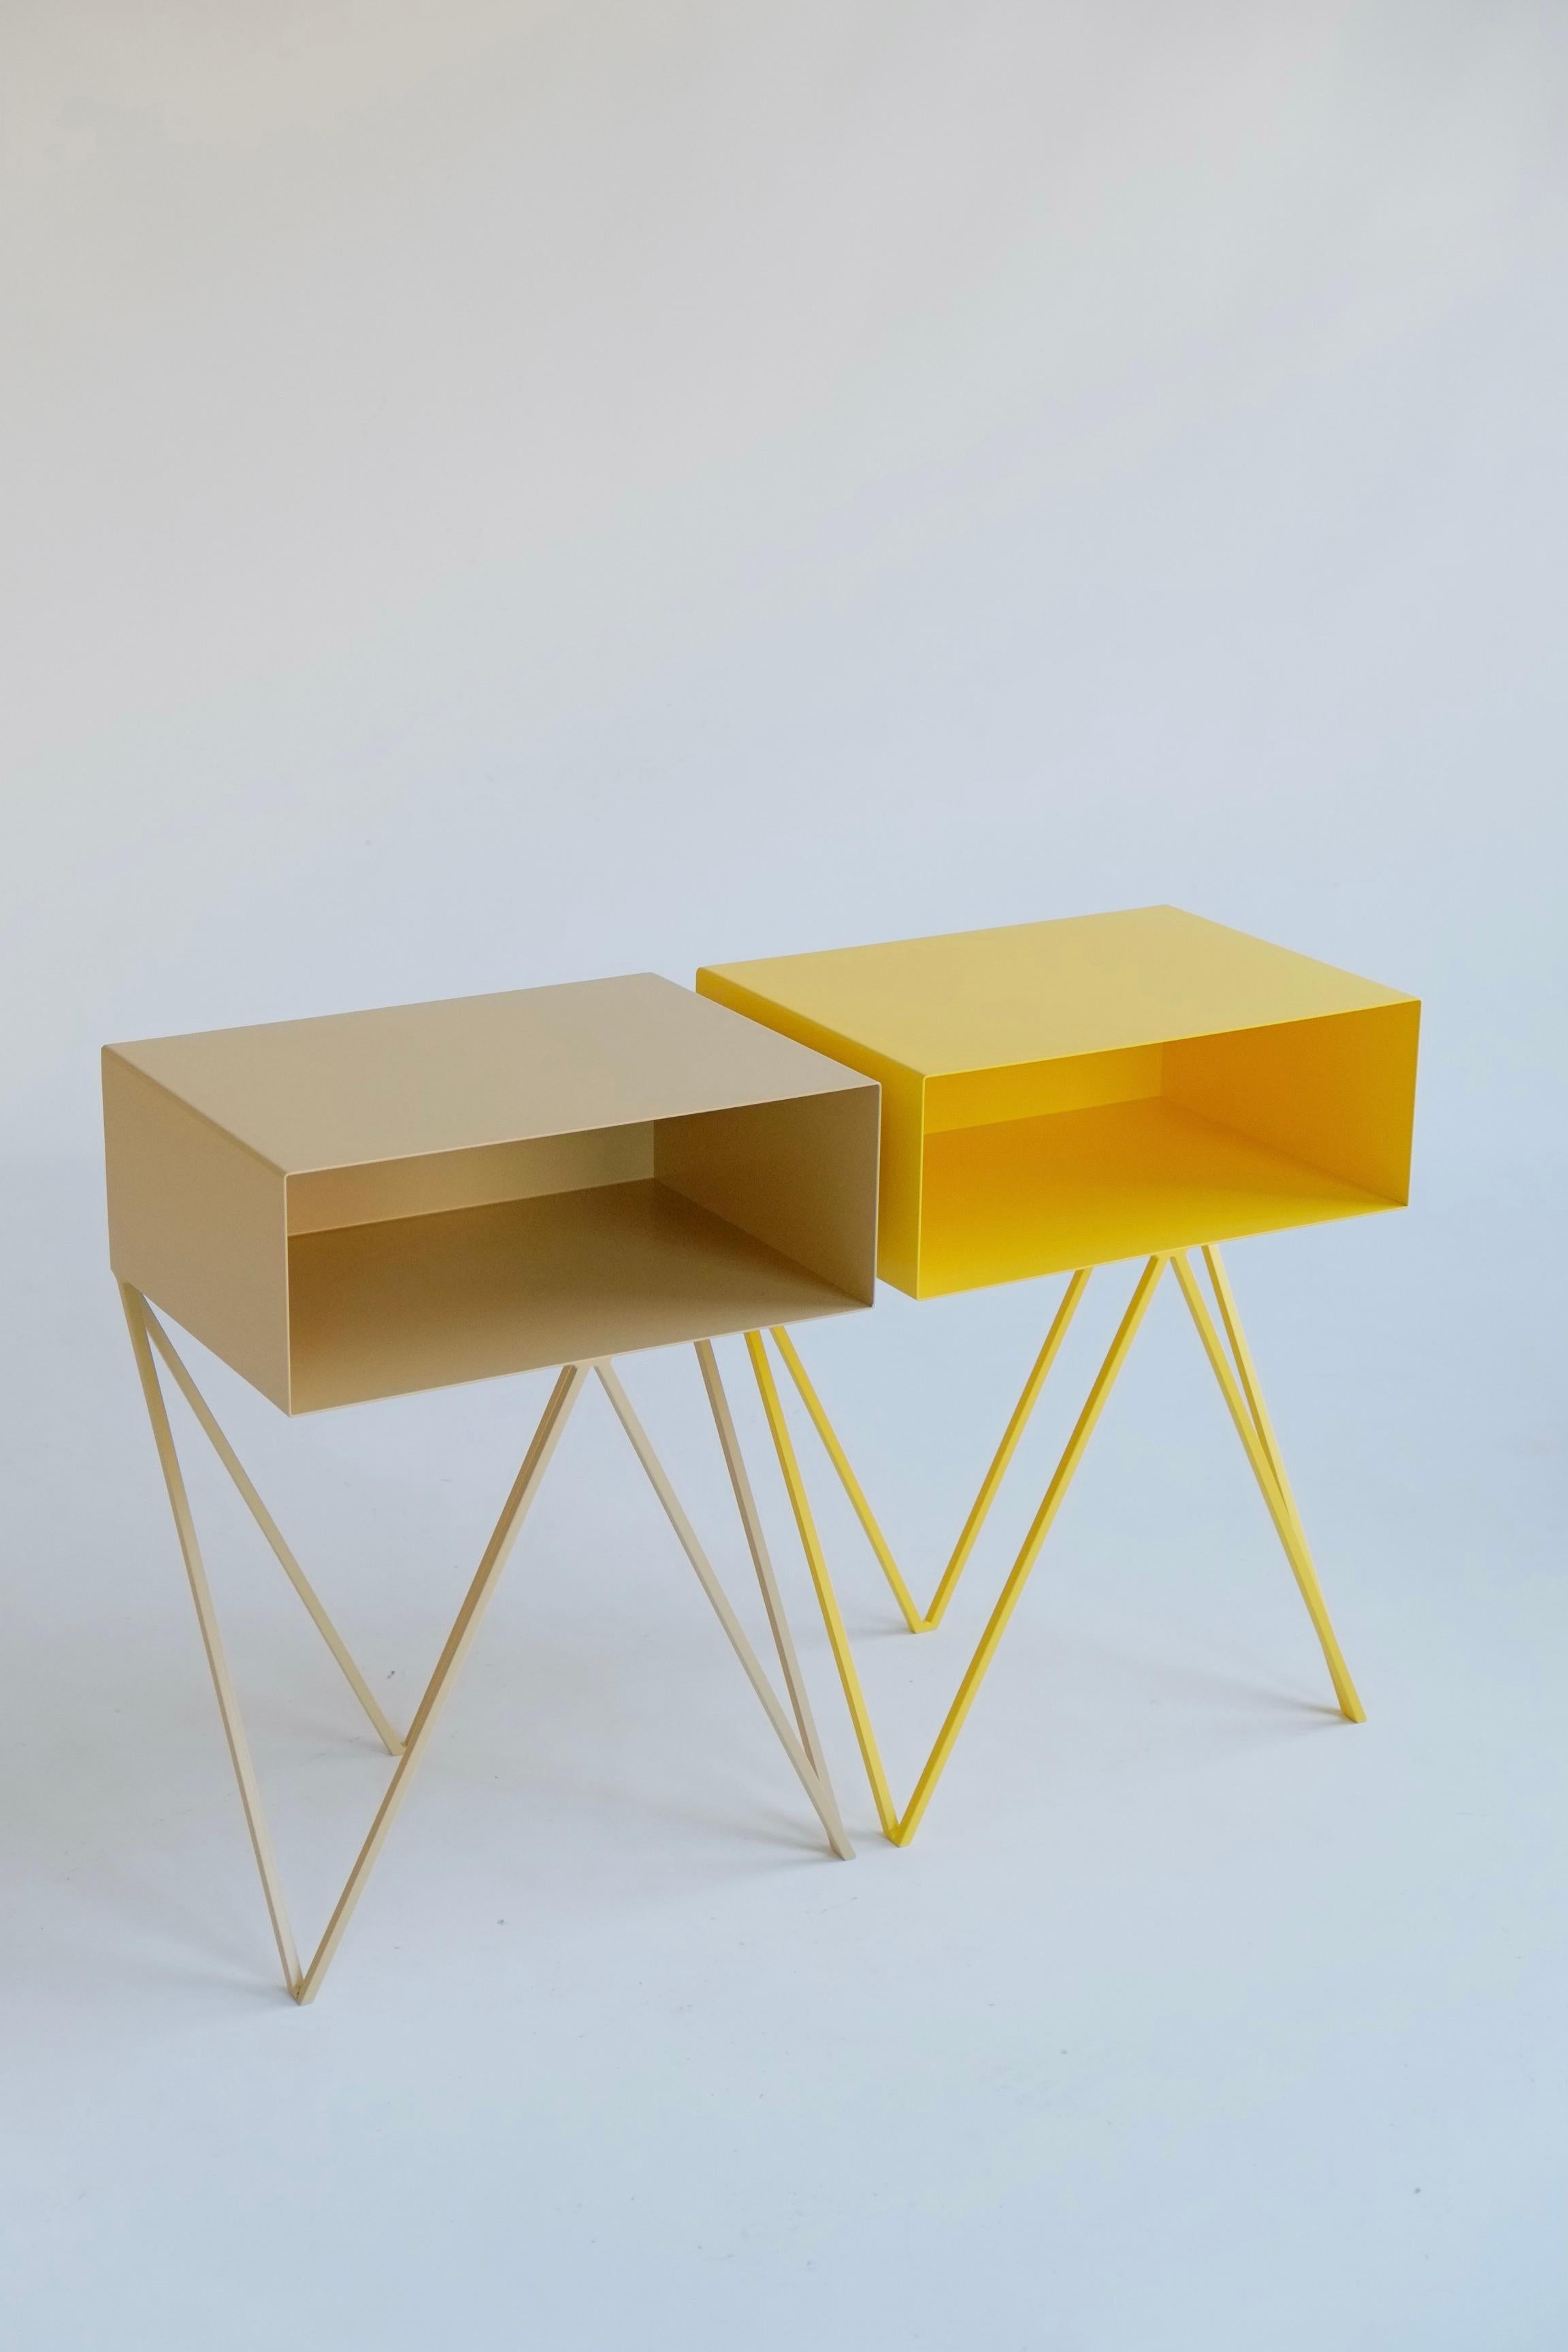 A beautiful pair of mismatched yellow and butternut Robot bedside tables. The Robot side table features an open shelf on zig zag legs. A fun and functional design made of solid steel, one is powder-coated in yellow and the other in butternut. The